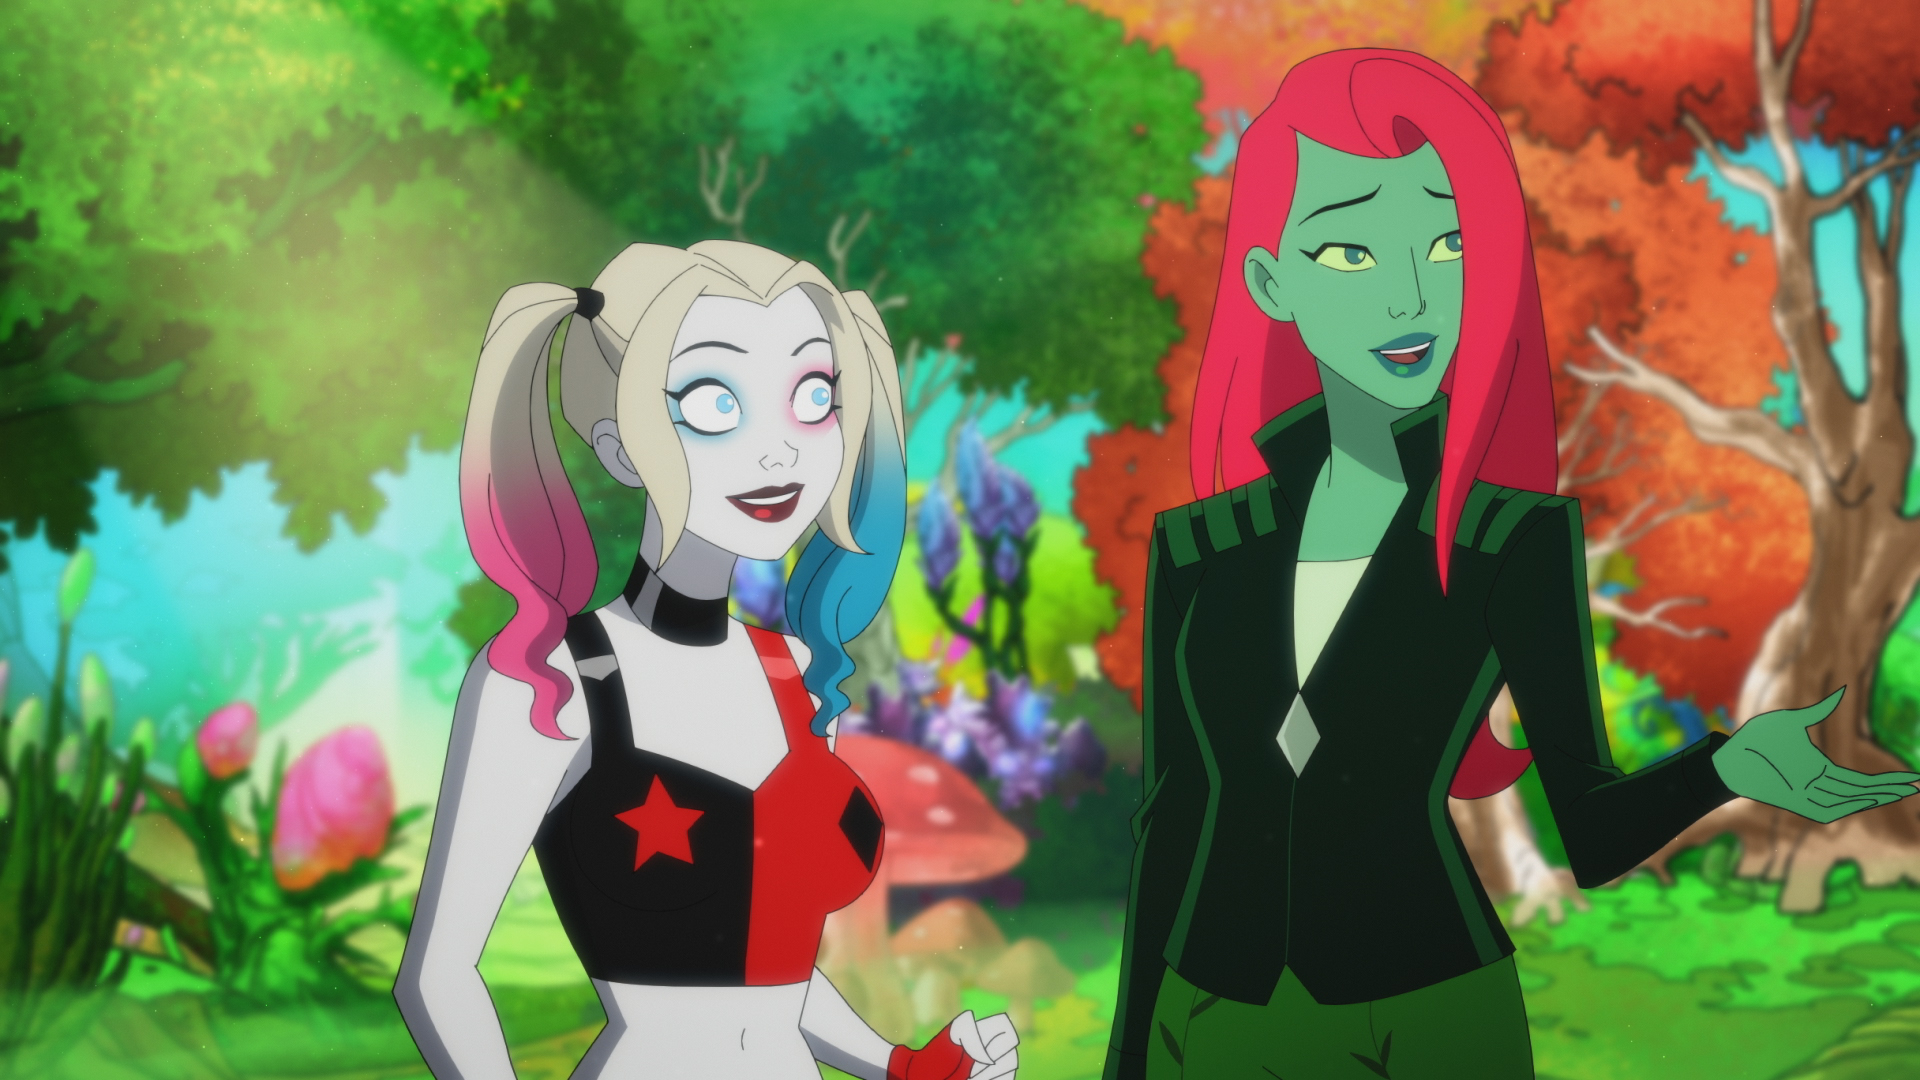 Harley Quinn and Poison Ivy stand in the woods in Harley Quinn season 3